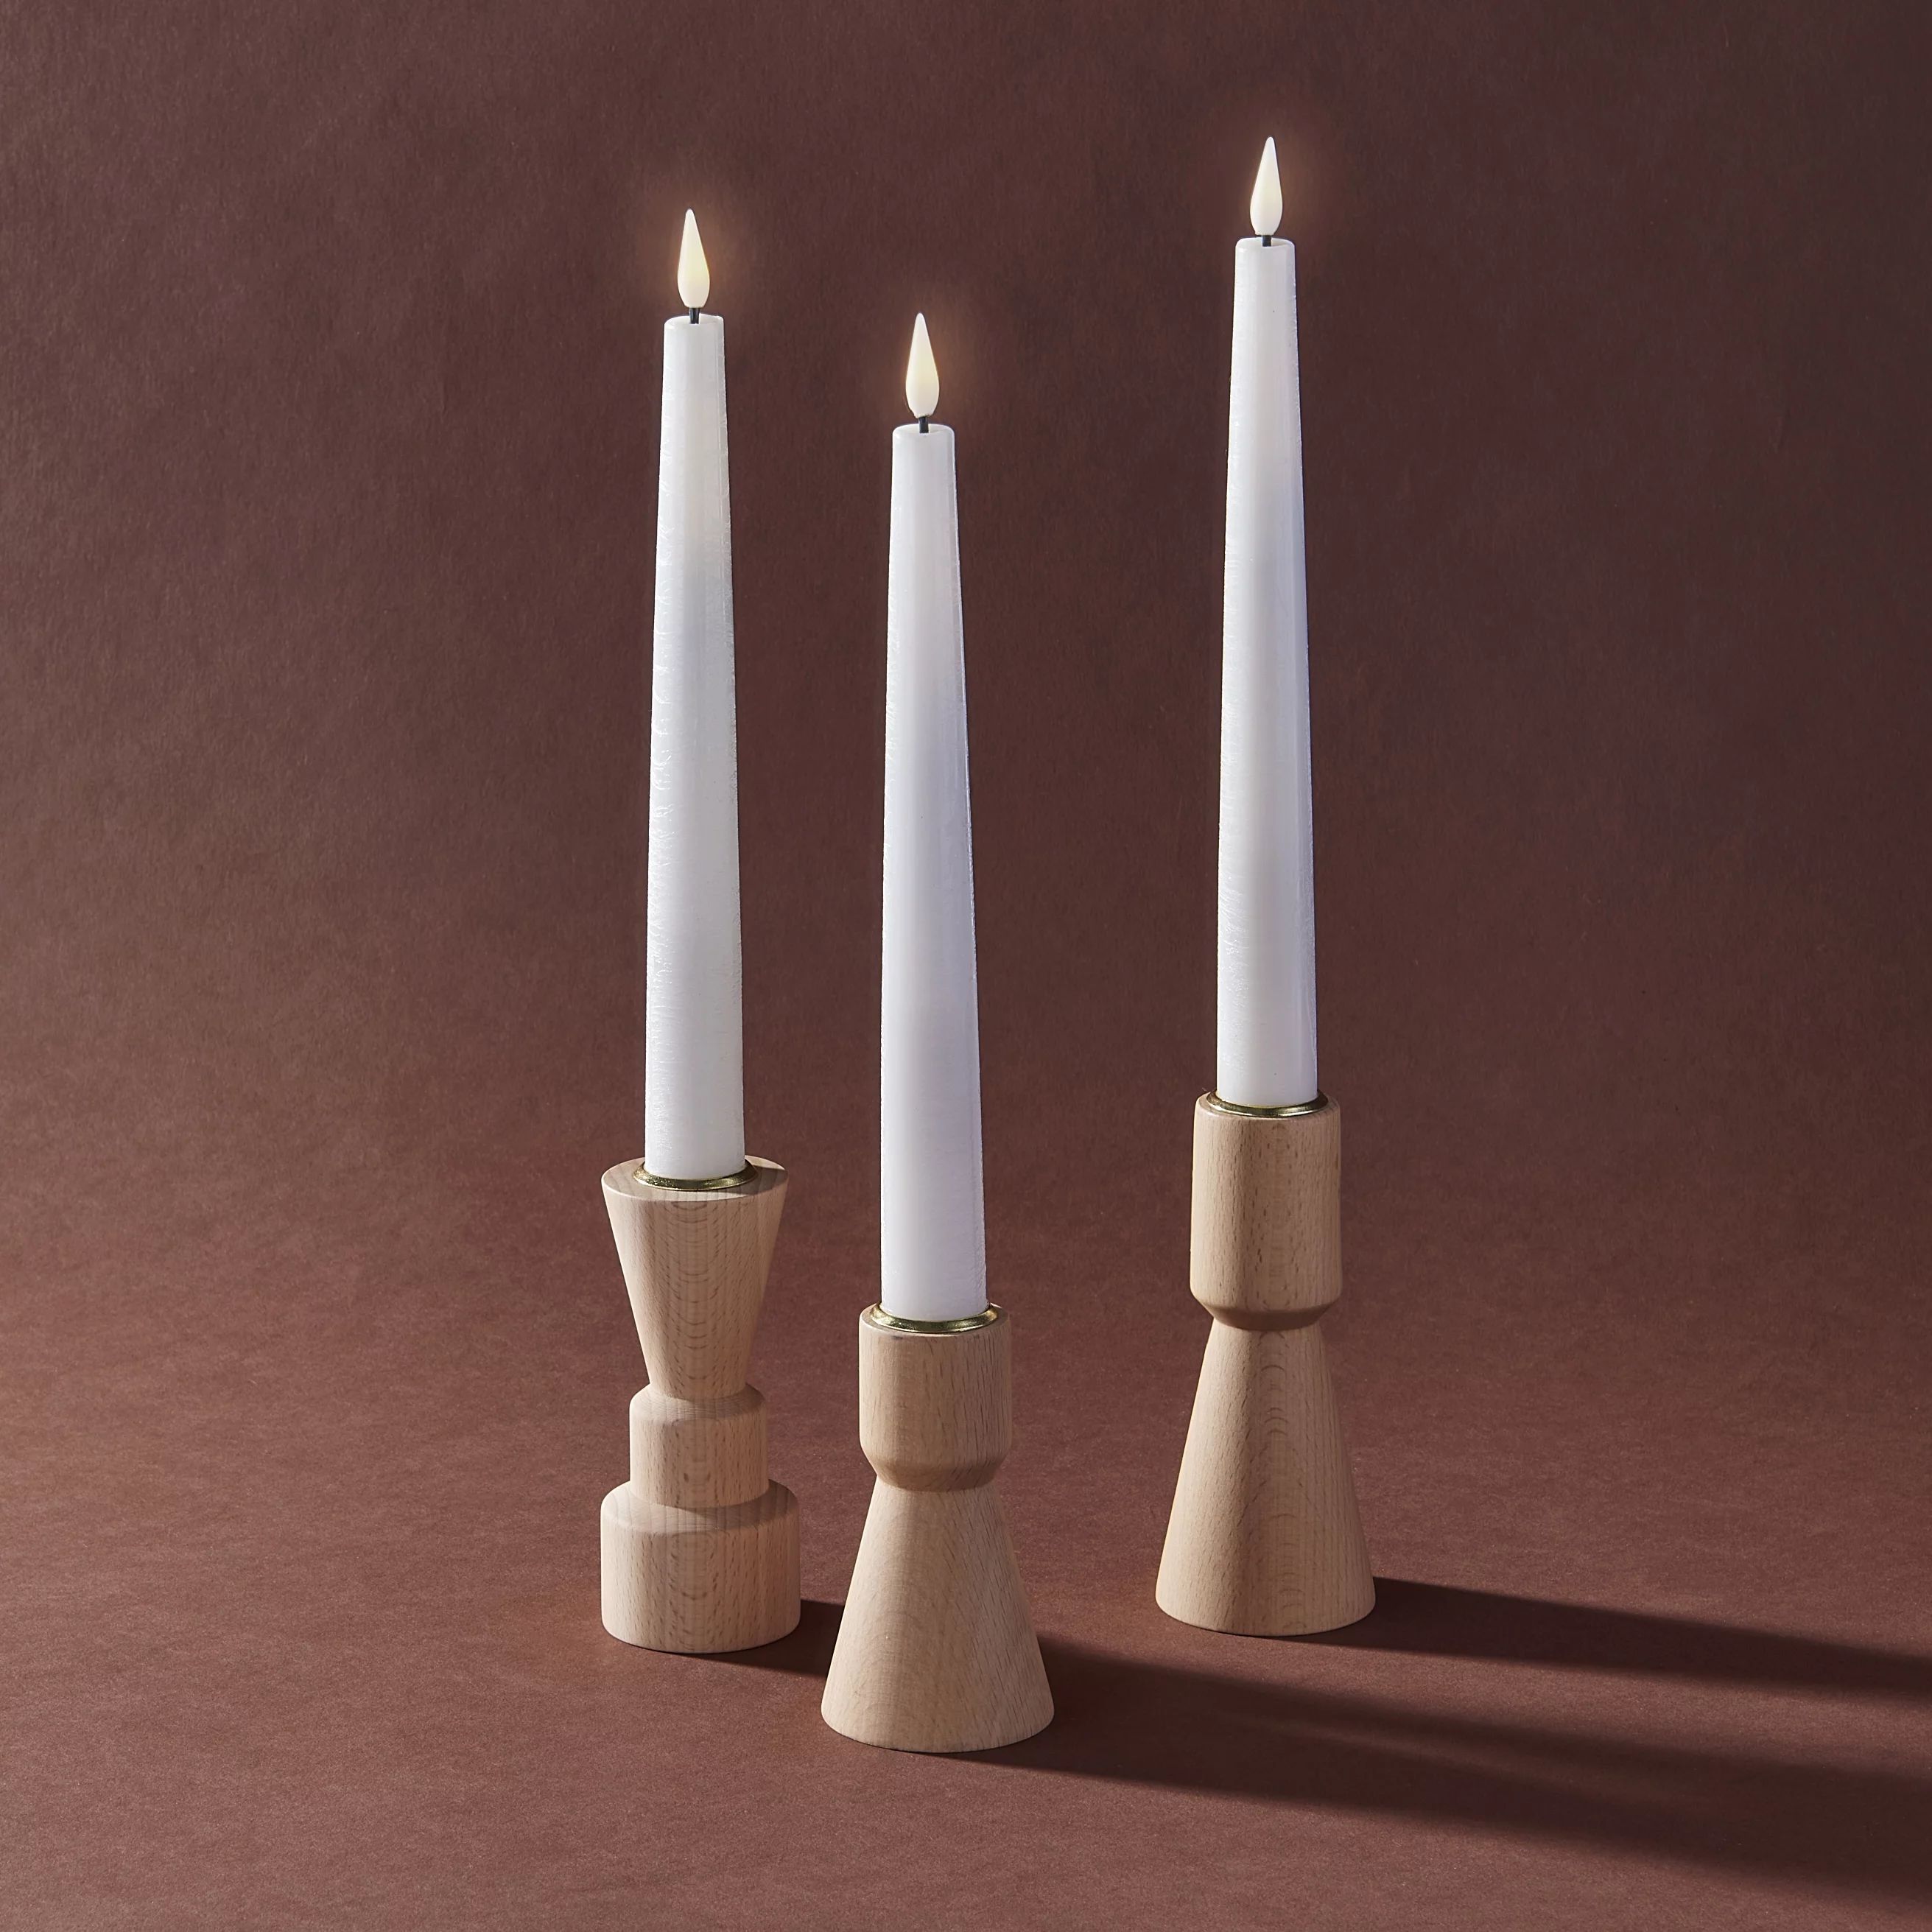 LampLust Modern Wood Candle Holders for Taper Candlesticks - 3 Pack | Walmart (US)